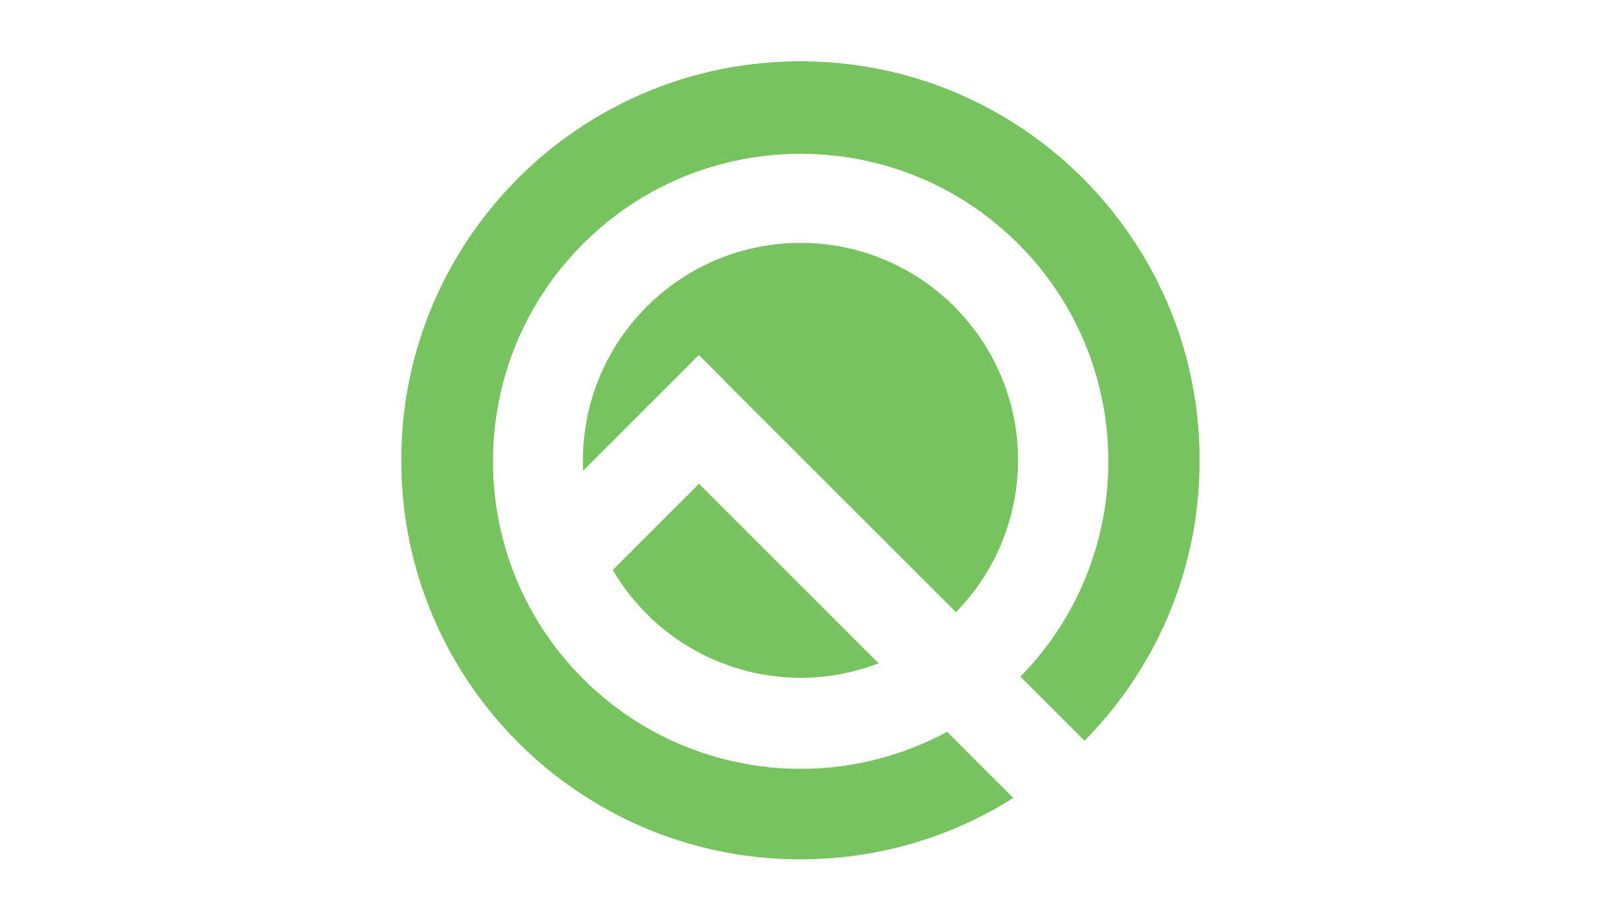 Android Update: Android Q beta 4, Google SOS alerts, and Huawei’s fight against the U.S.